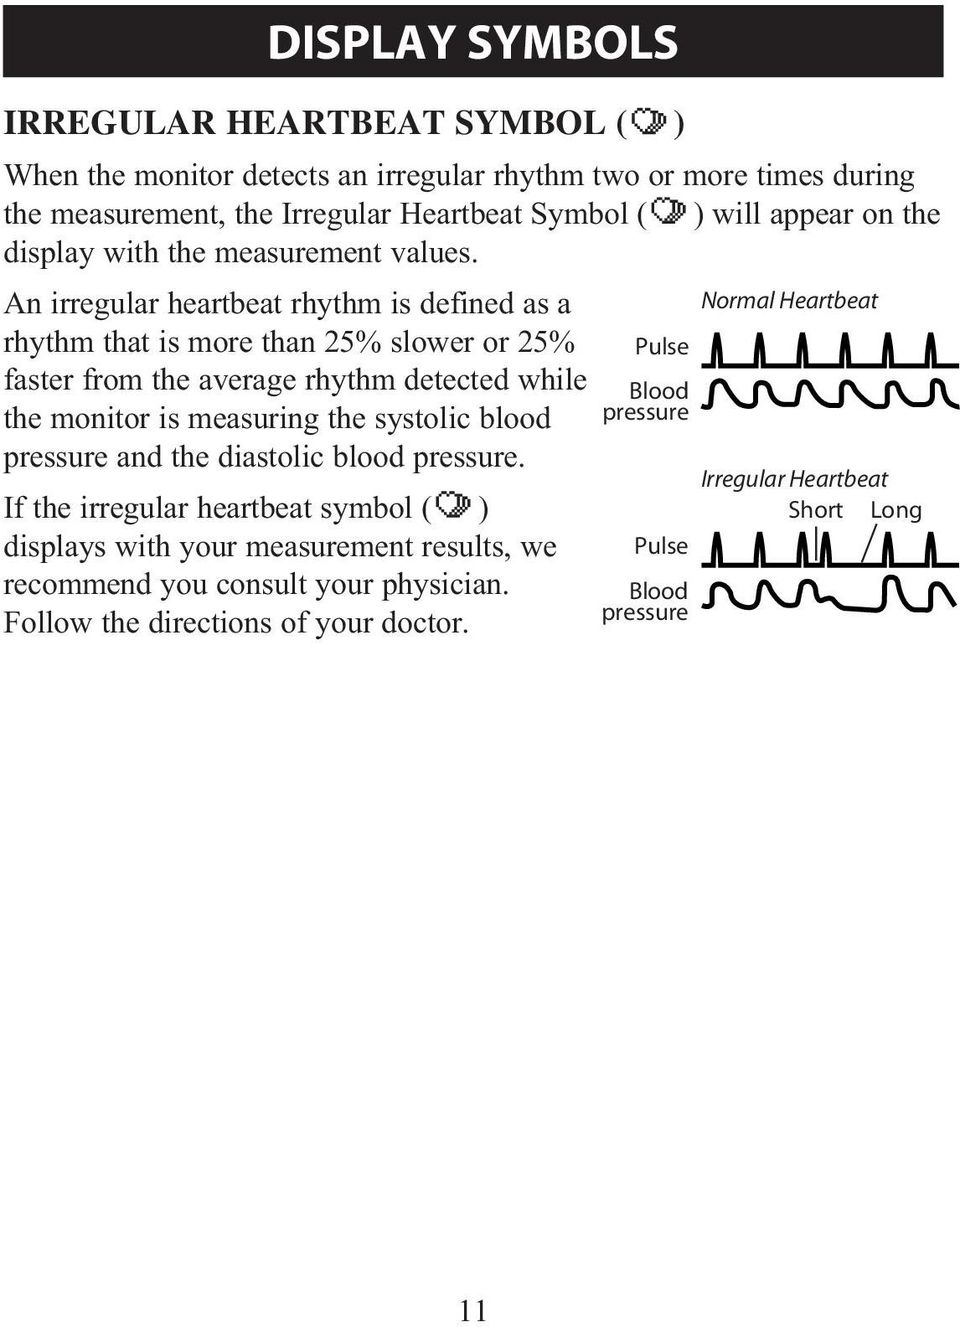 An irregular heartbeat rhythm is defined as a rhythm that is more than 25% slower or 25% faster from the average rhythm detected while the monitor is measuring the systolic